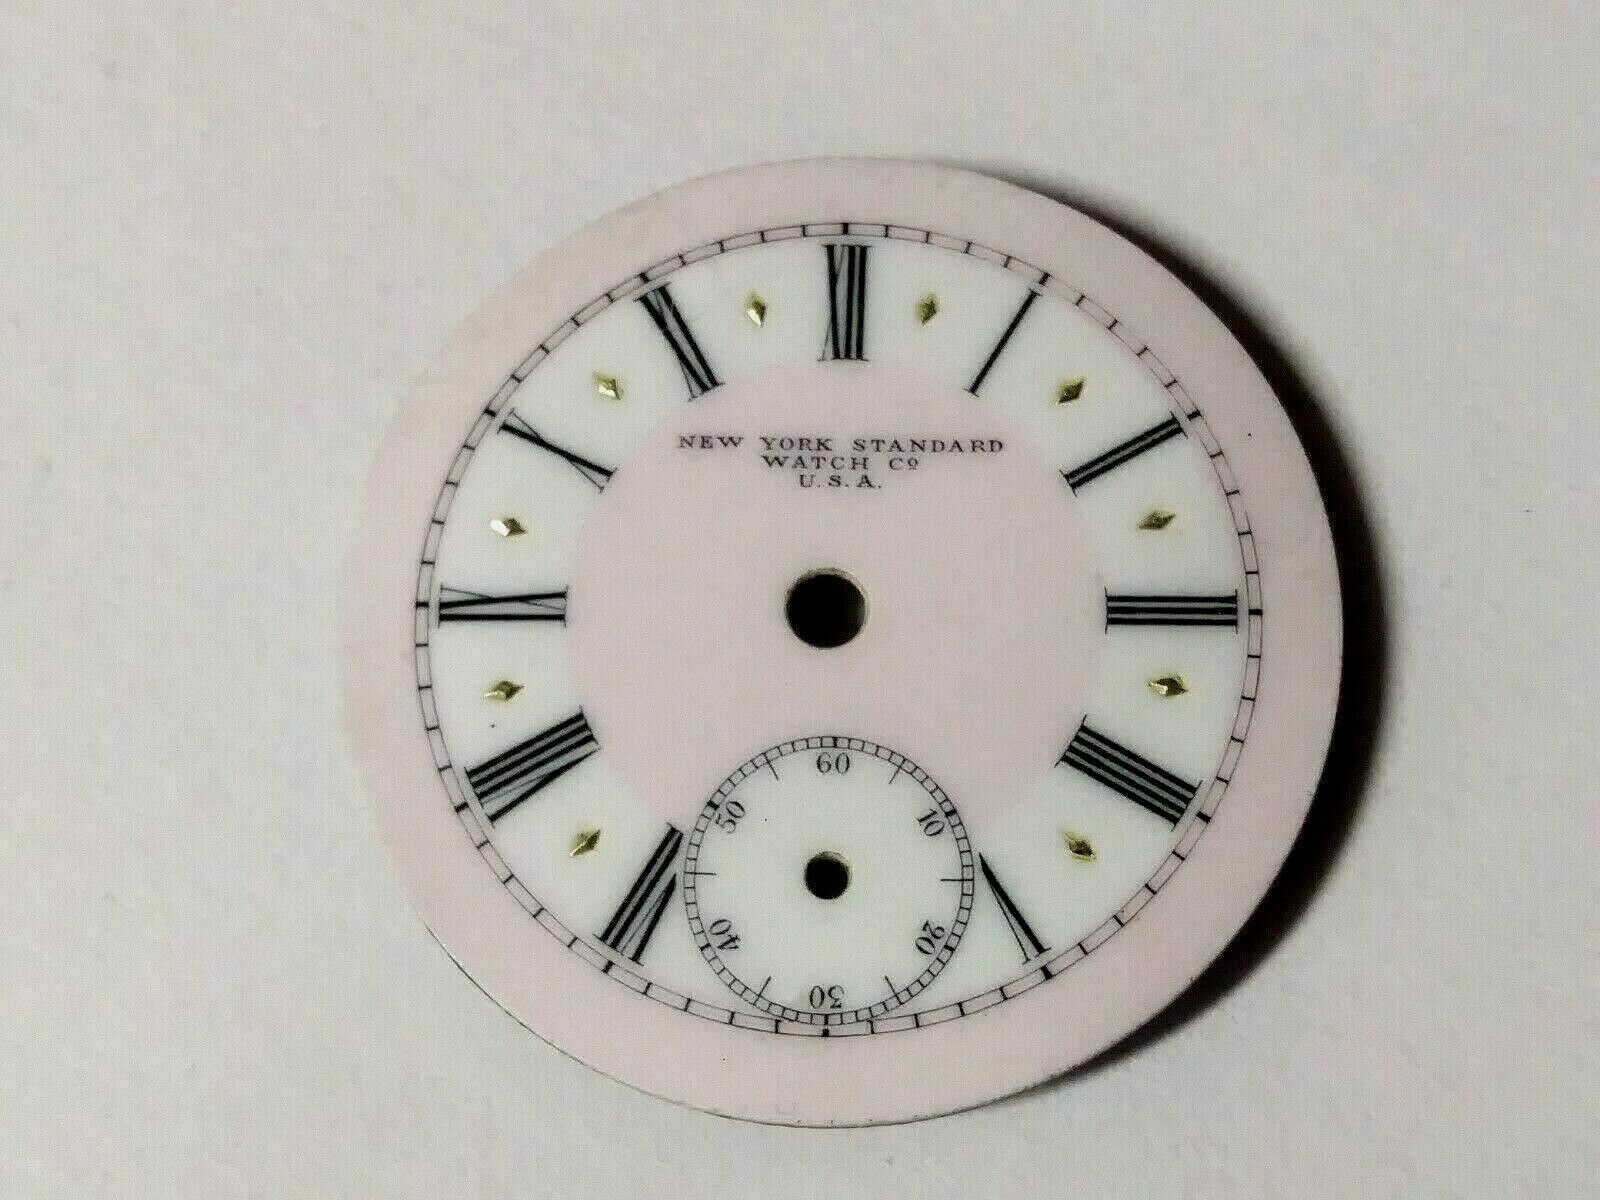 Beautiful 6 size New York Standard Multi Color pocket watch dial. Take a look!